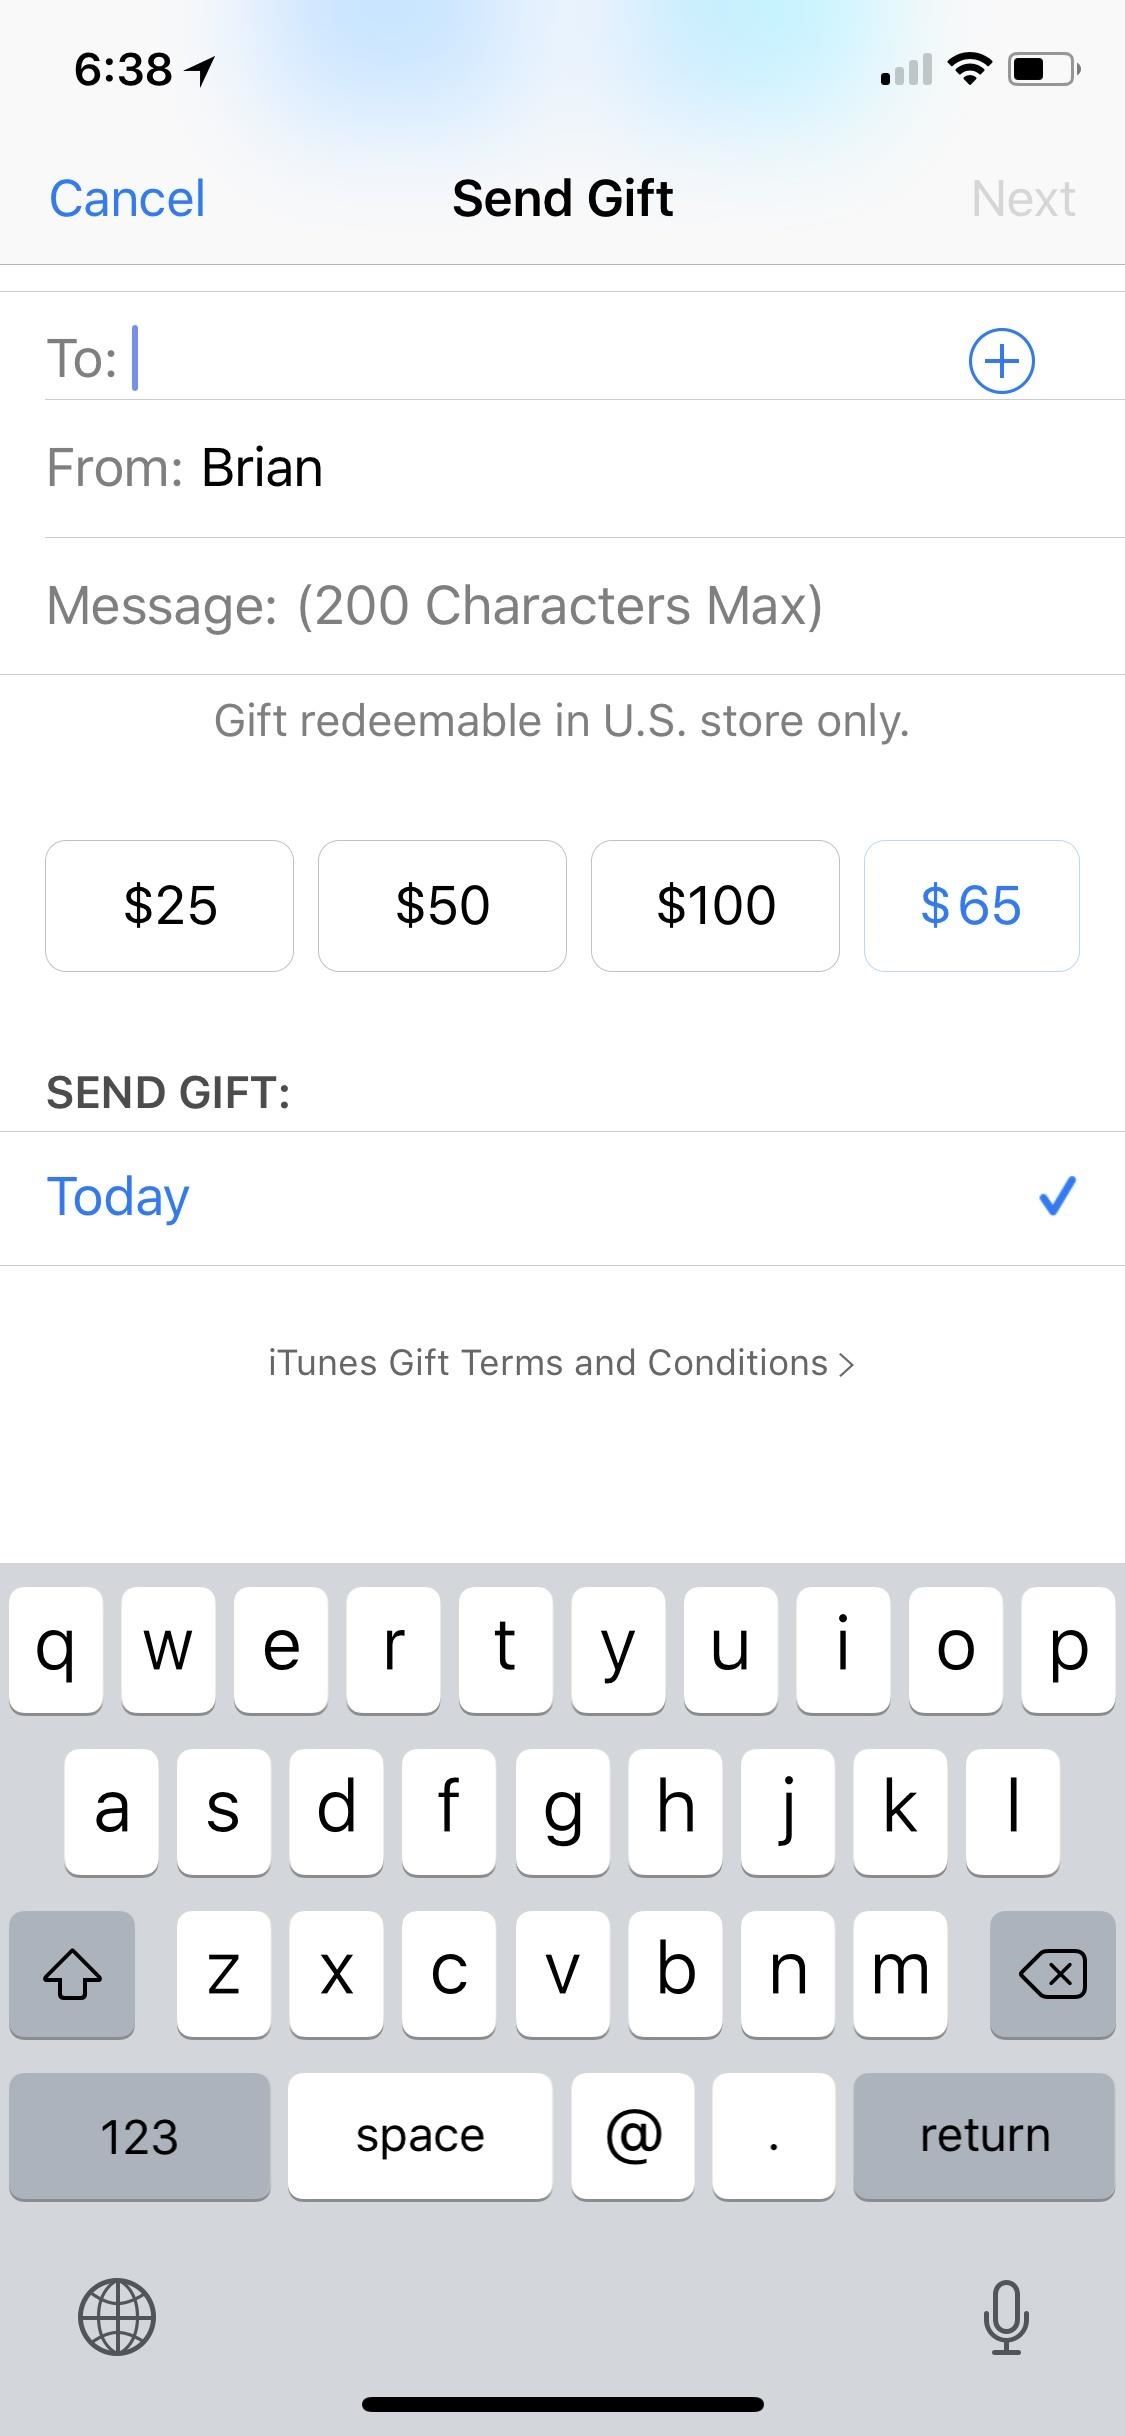 How to Gift iOS Apps, Games, Movies, Music, Books & TV Shows to iPhone Users